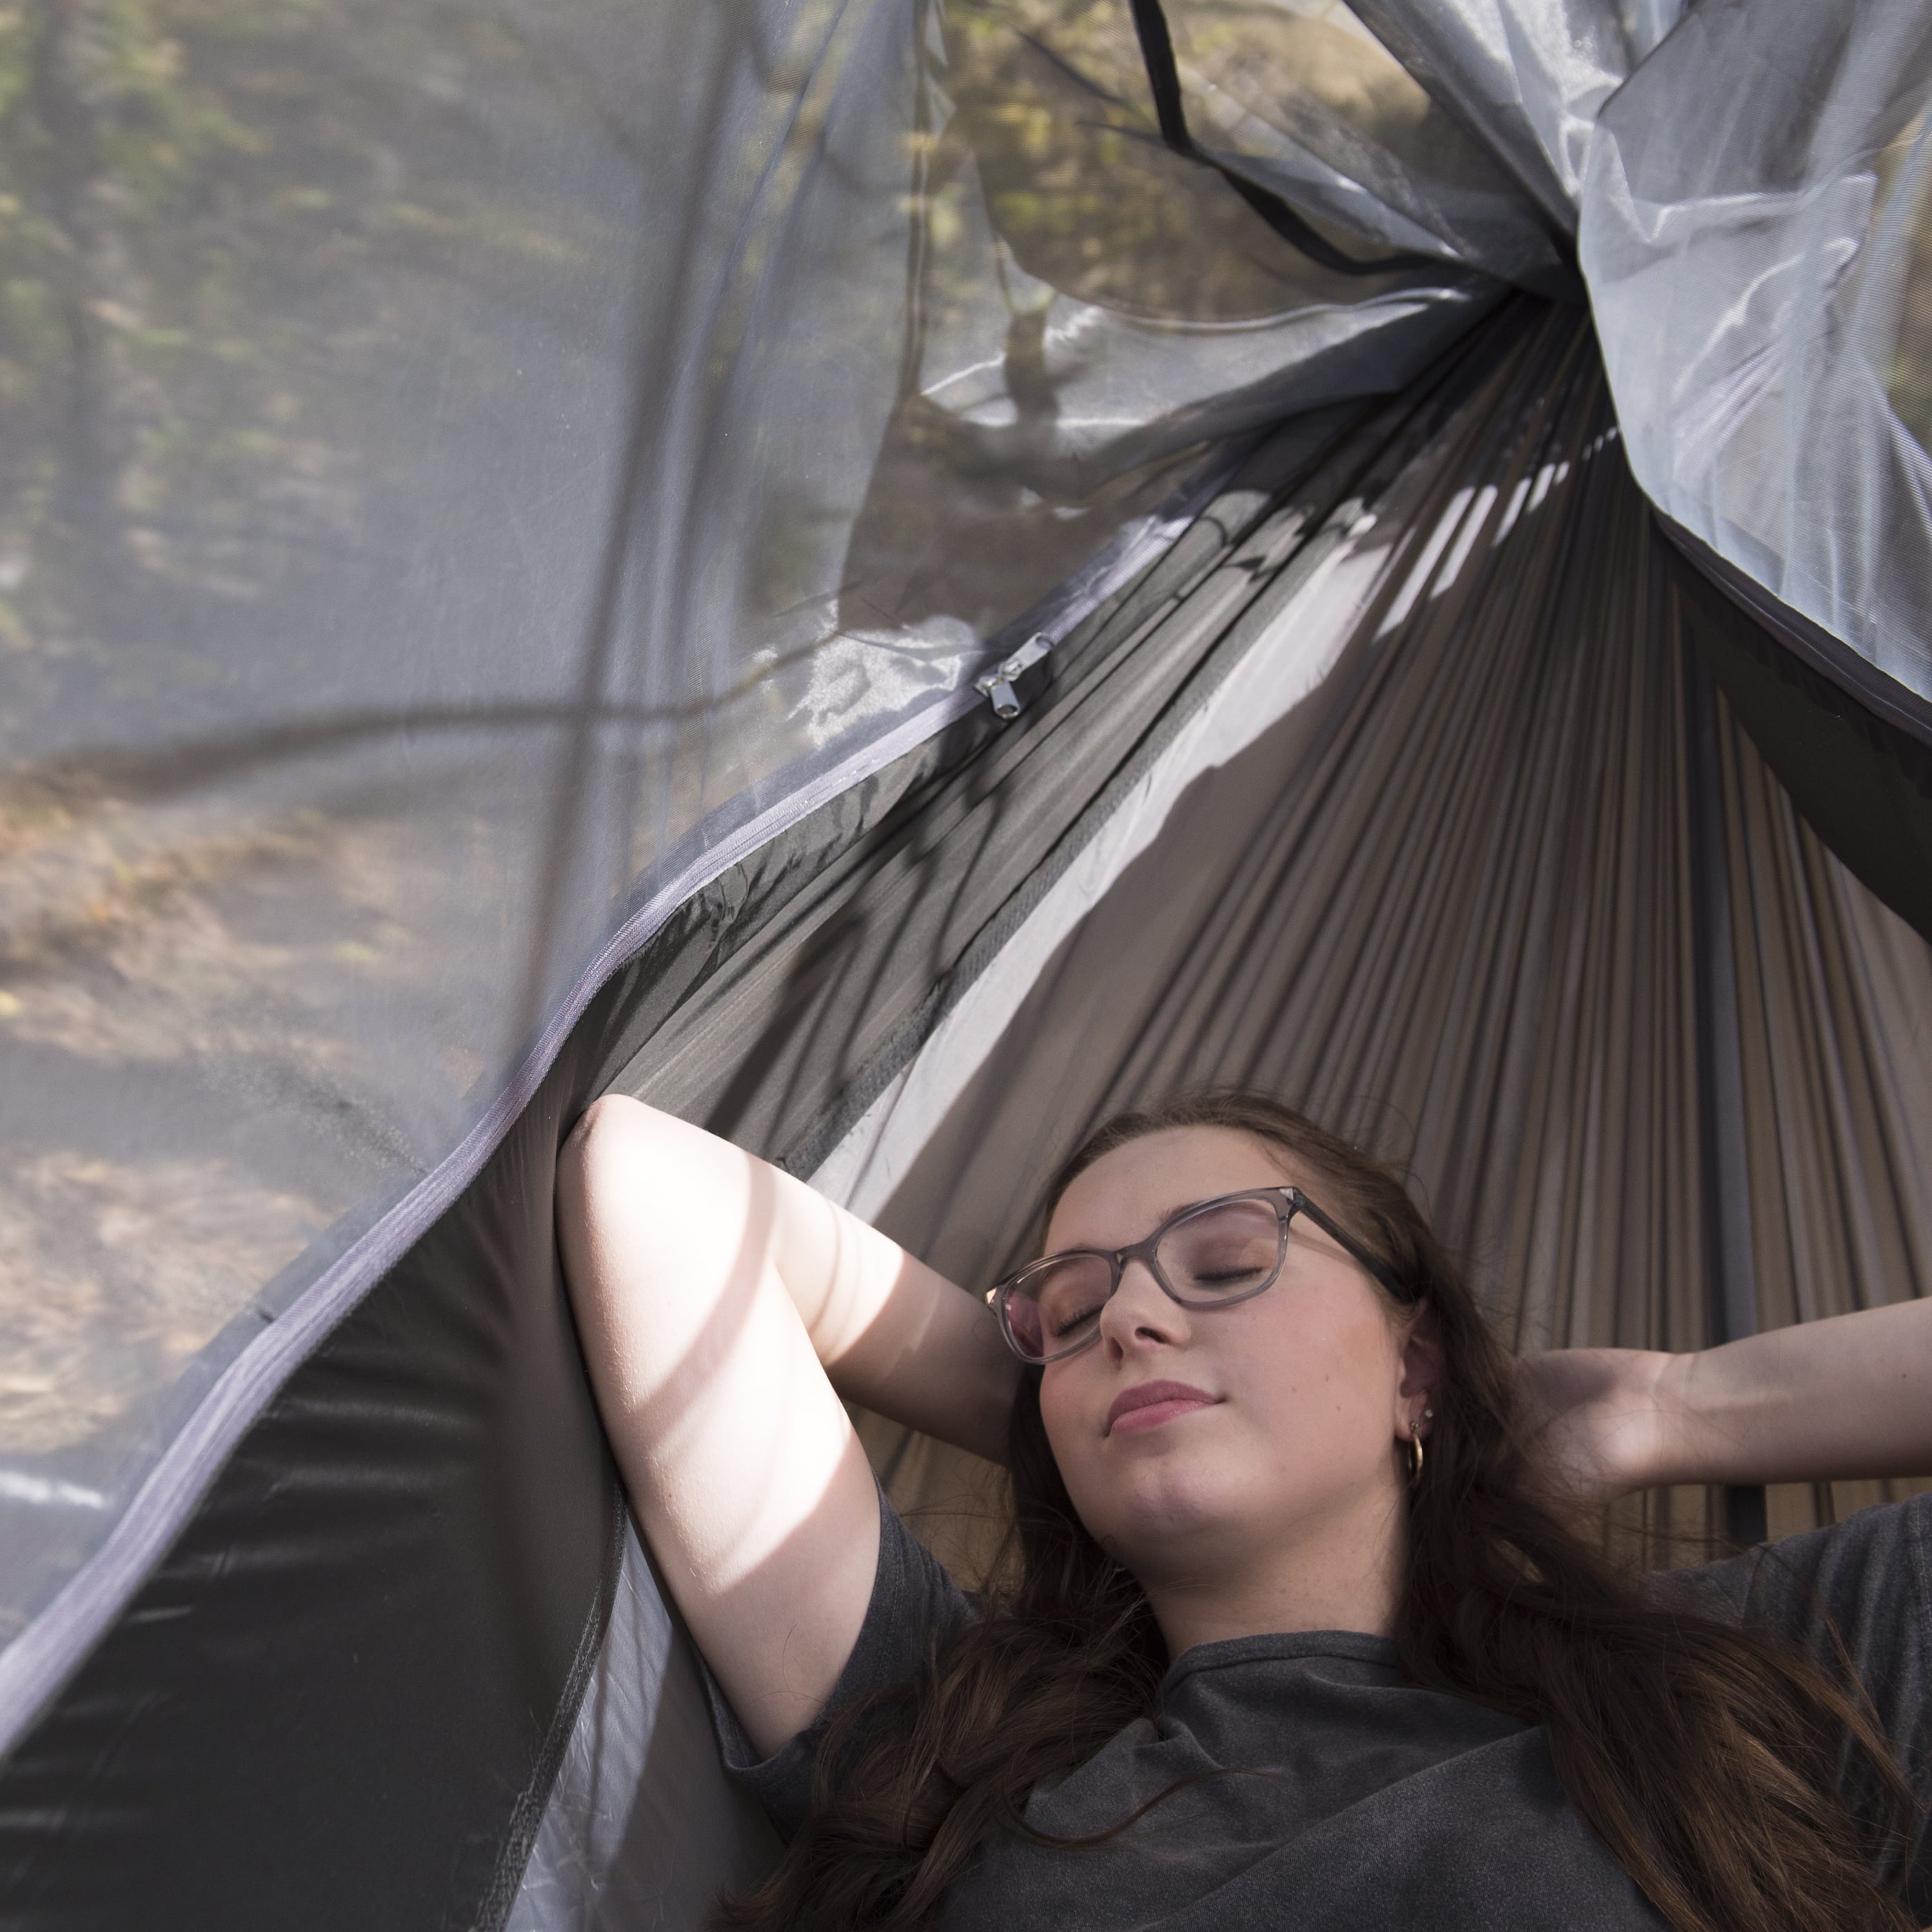 Equip Nylon Mosquito Hammock with Attached Bug Net, 1 Person Dark Gray and Black, Size 115" L x 59" W